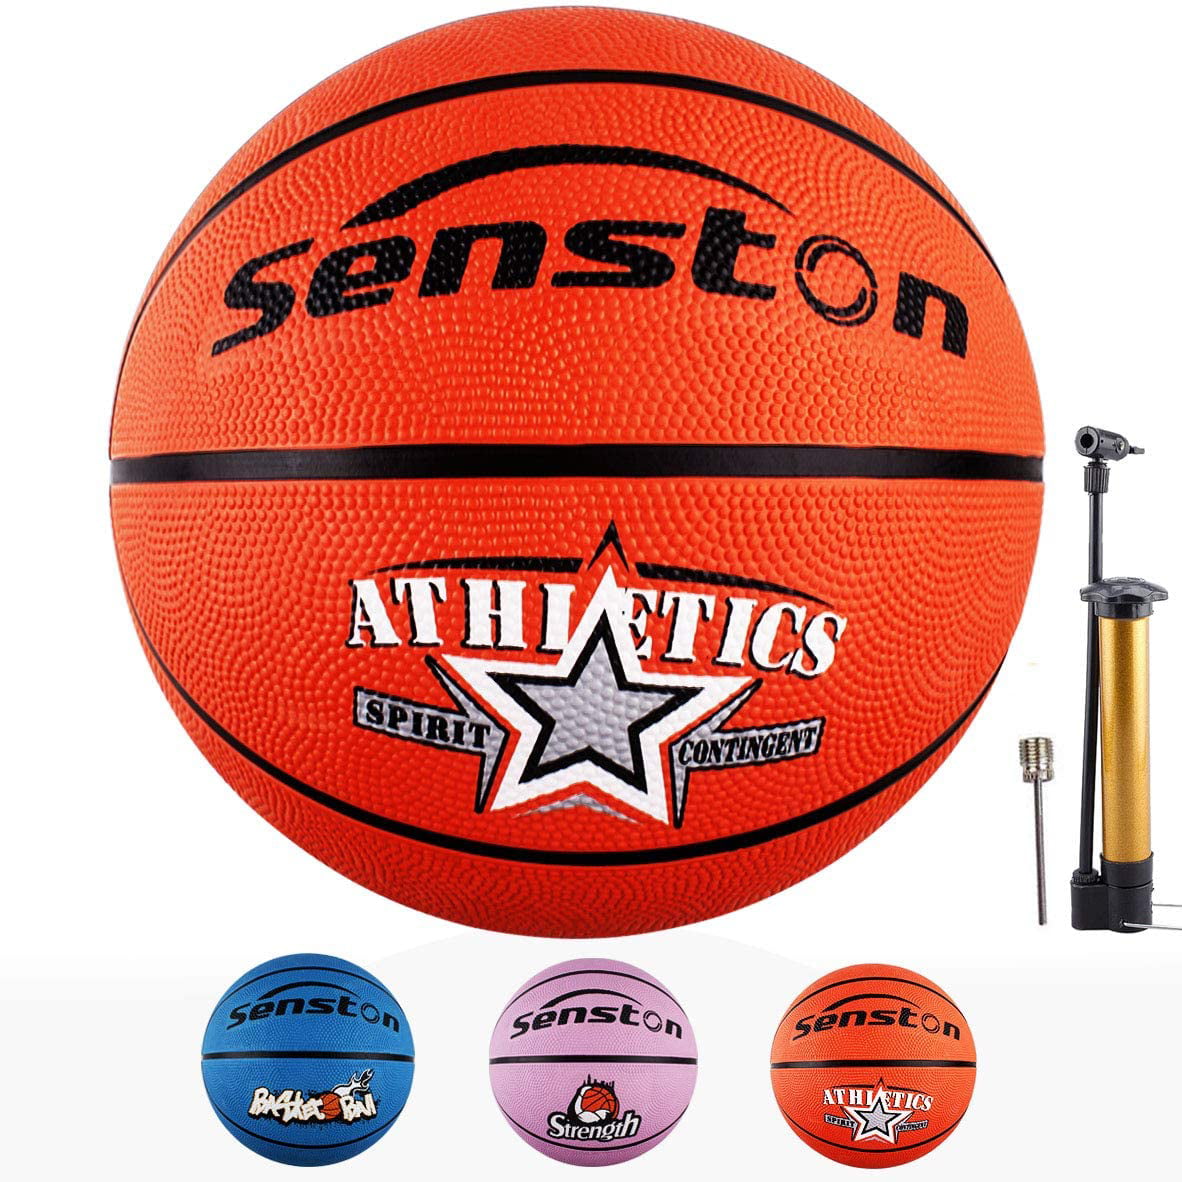 Senston Basketball with Pump Adults Kids PU Leather Basketball Size 7 Indoor Outdoor Ball Game 